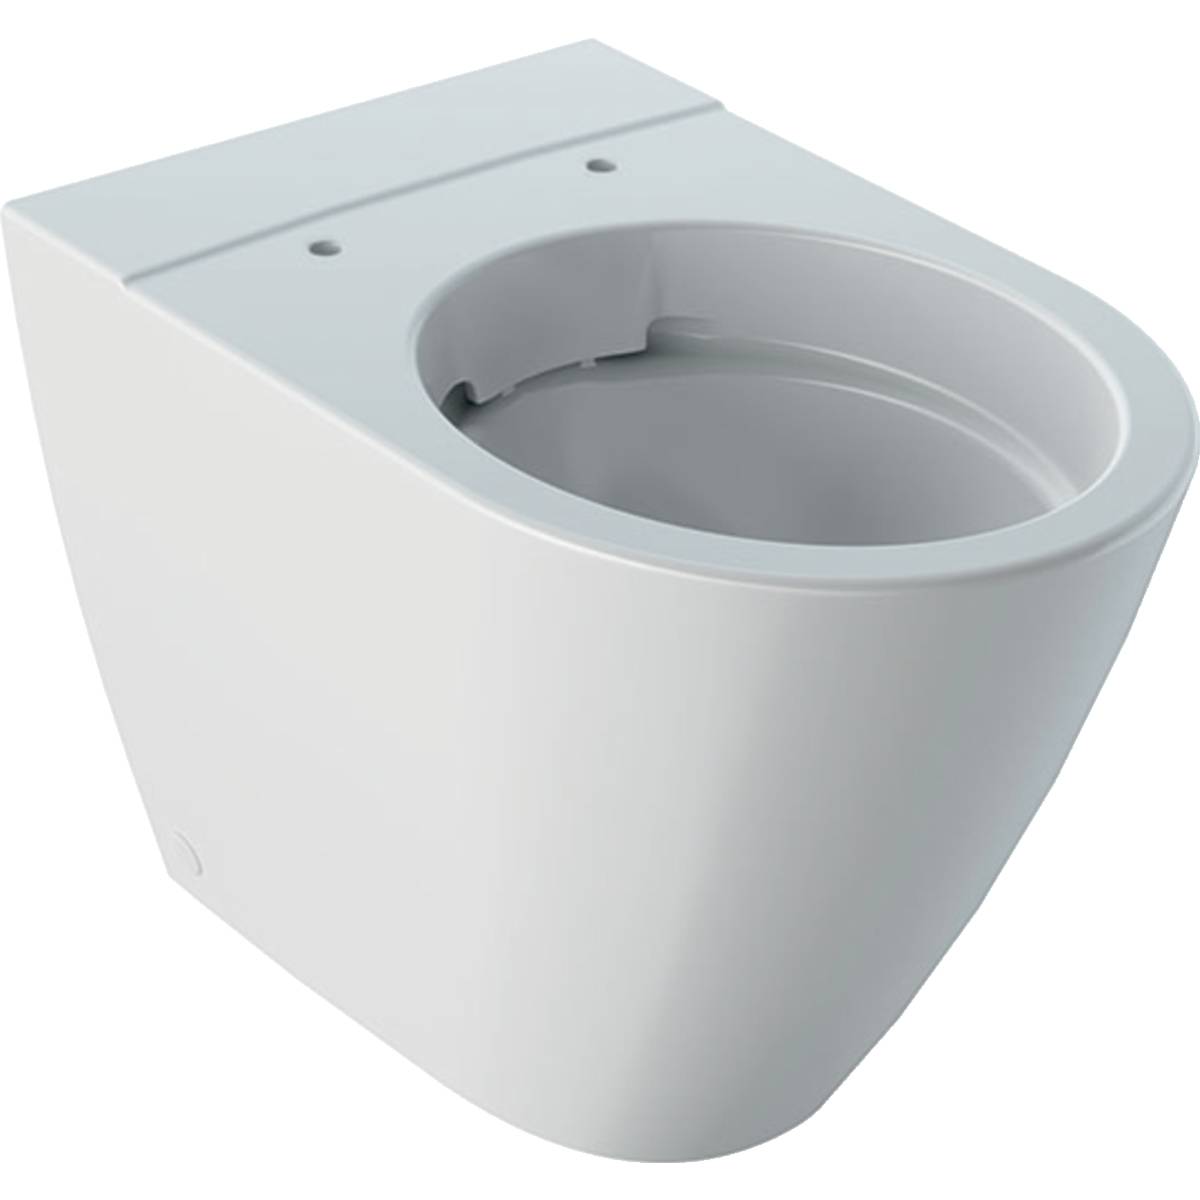 iCon Floor-Standing WC, Washdown, Back-To-Wall, Shrouded, Rimfree